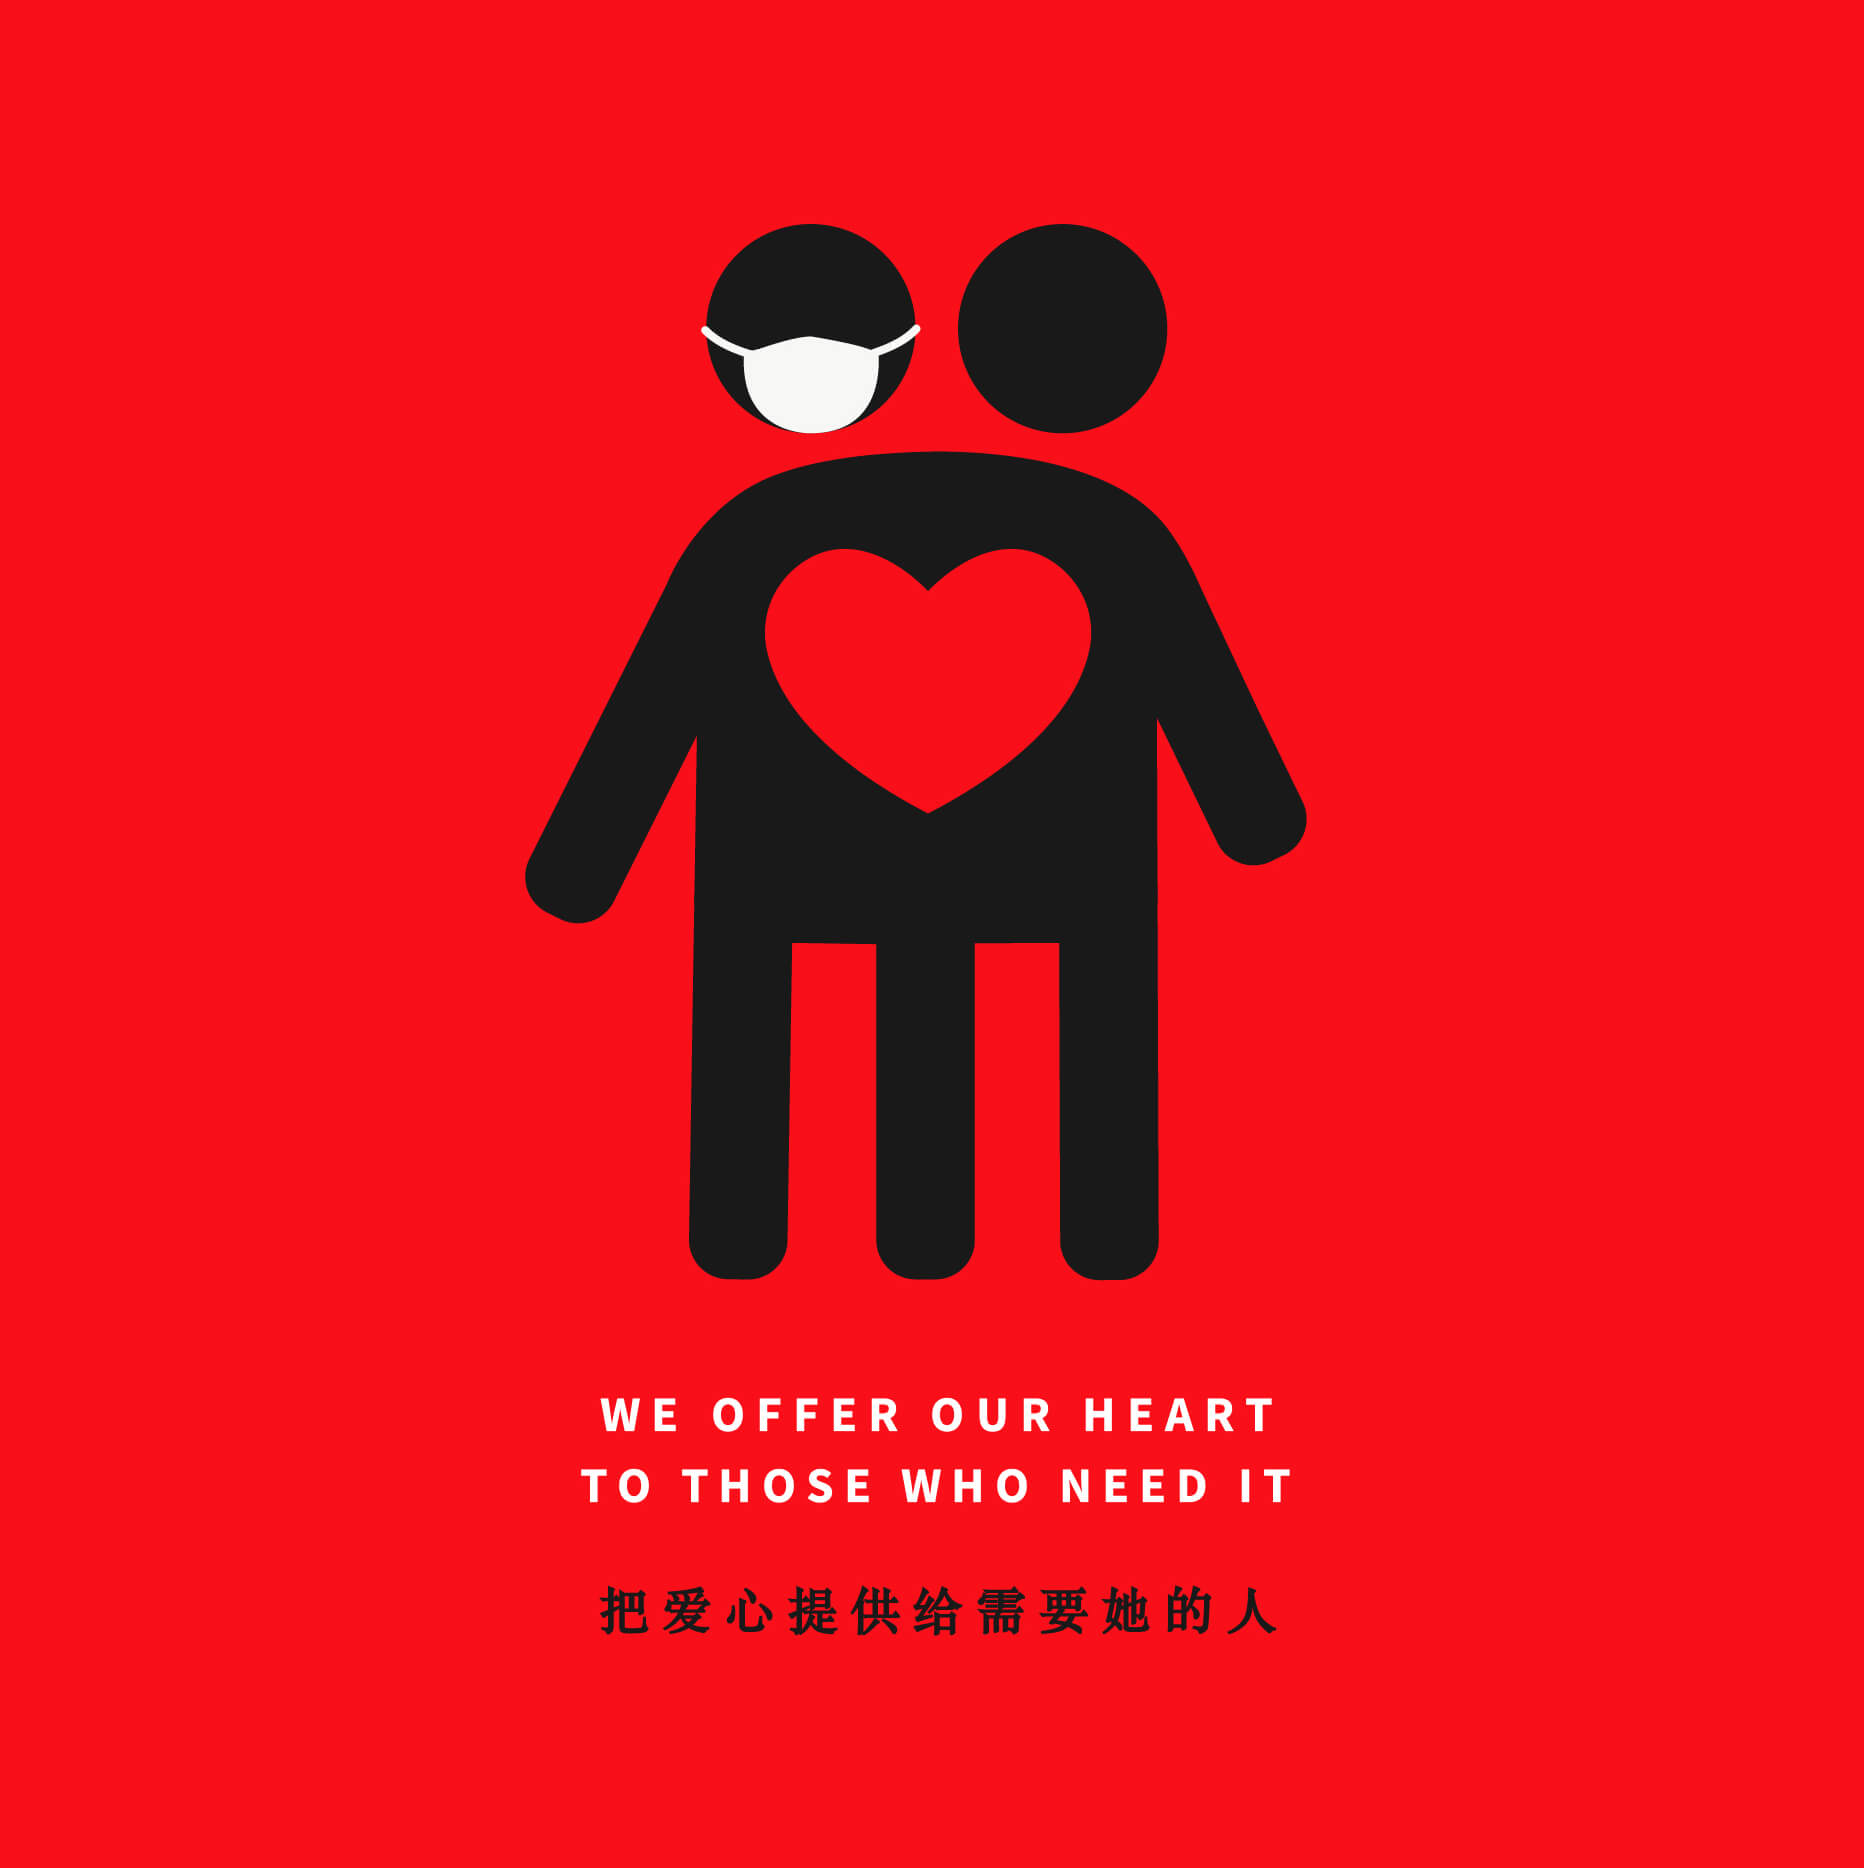 We offer our heart - International Poster ExhIbition by UN AIDS-02